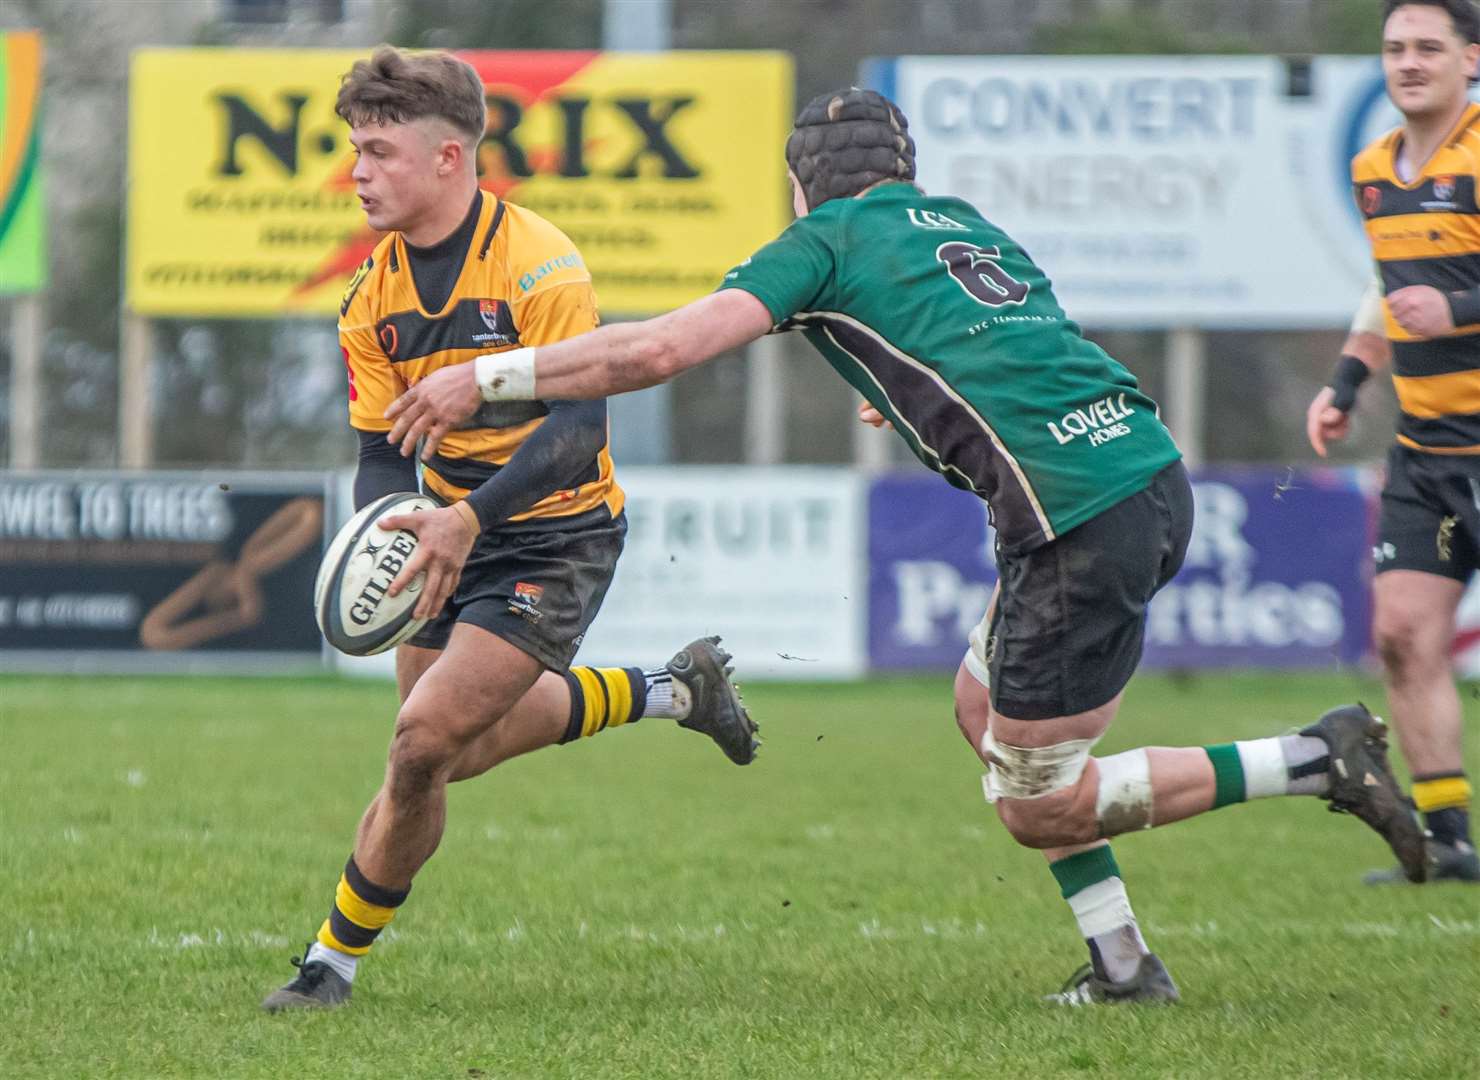 Presley Farrance beats his man during Canterbury's weekend 41-12 win over North Walsham. Picture: Phillipa Hilton